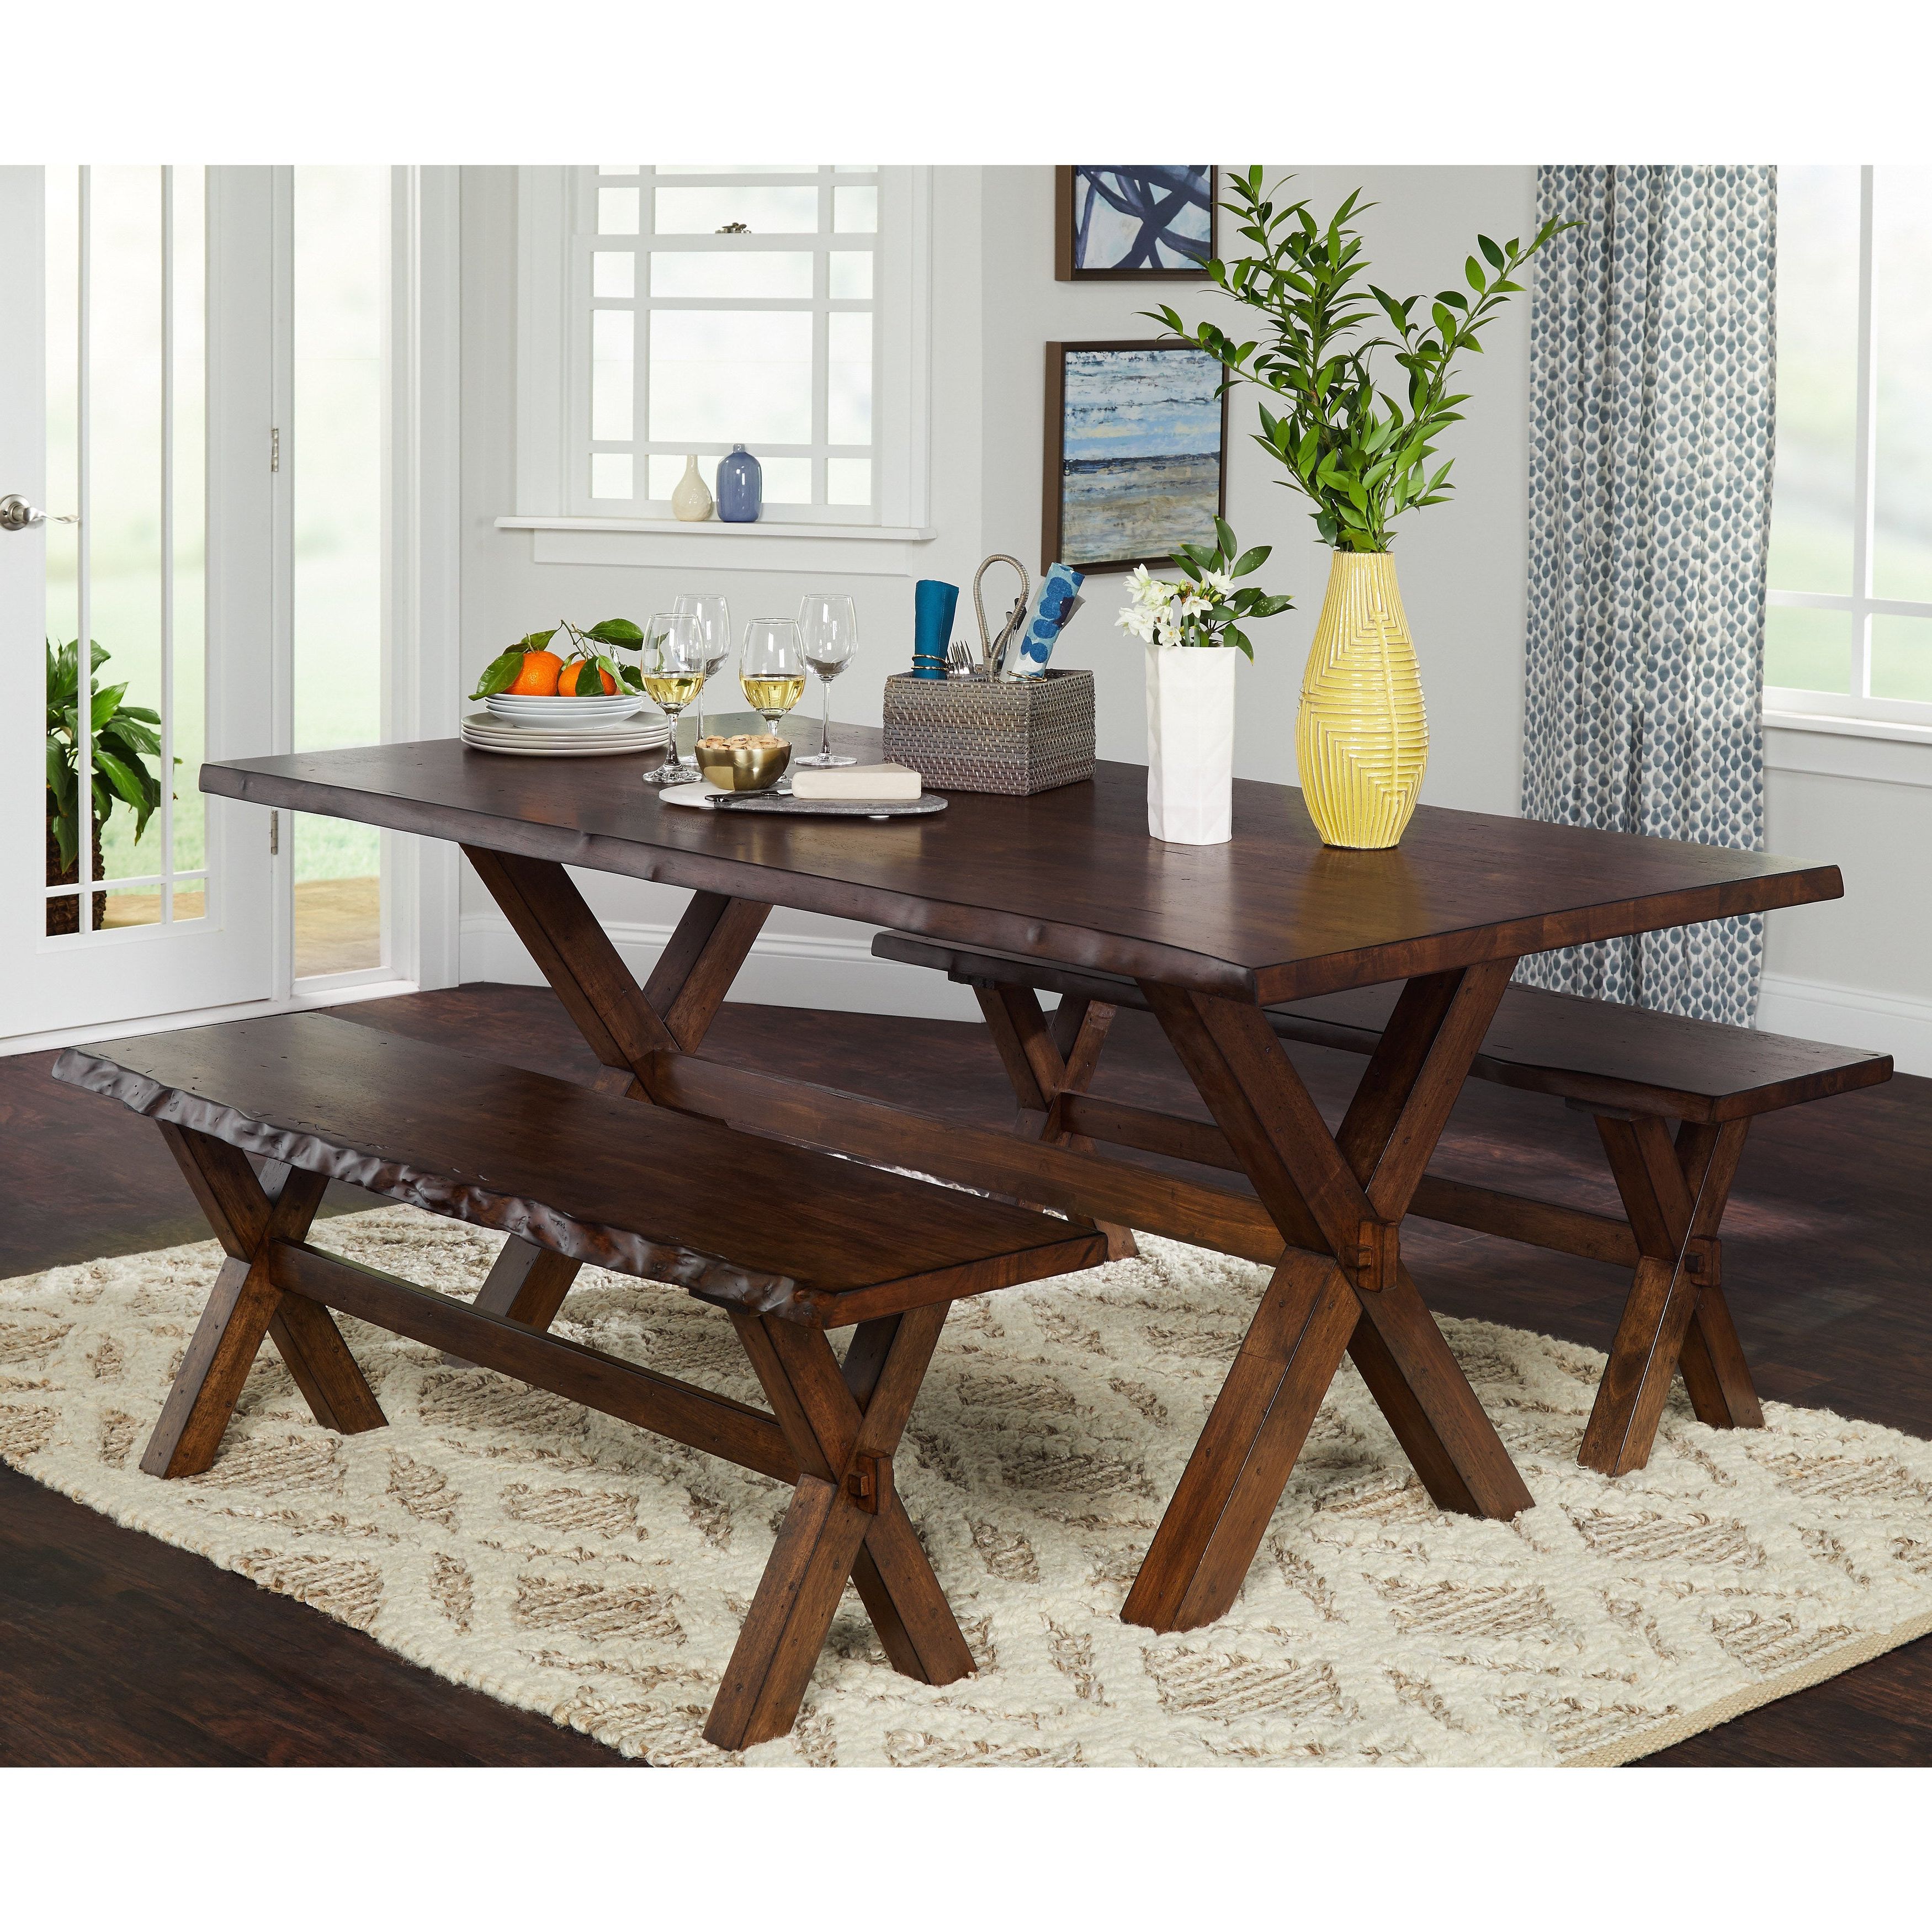 Buy Farmhouse Kitchen & Dining Room Sets Online At Overstock (View 20 of 20)